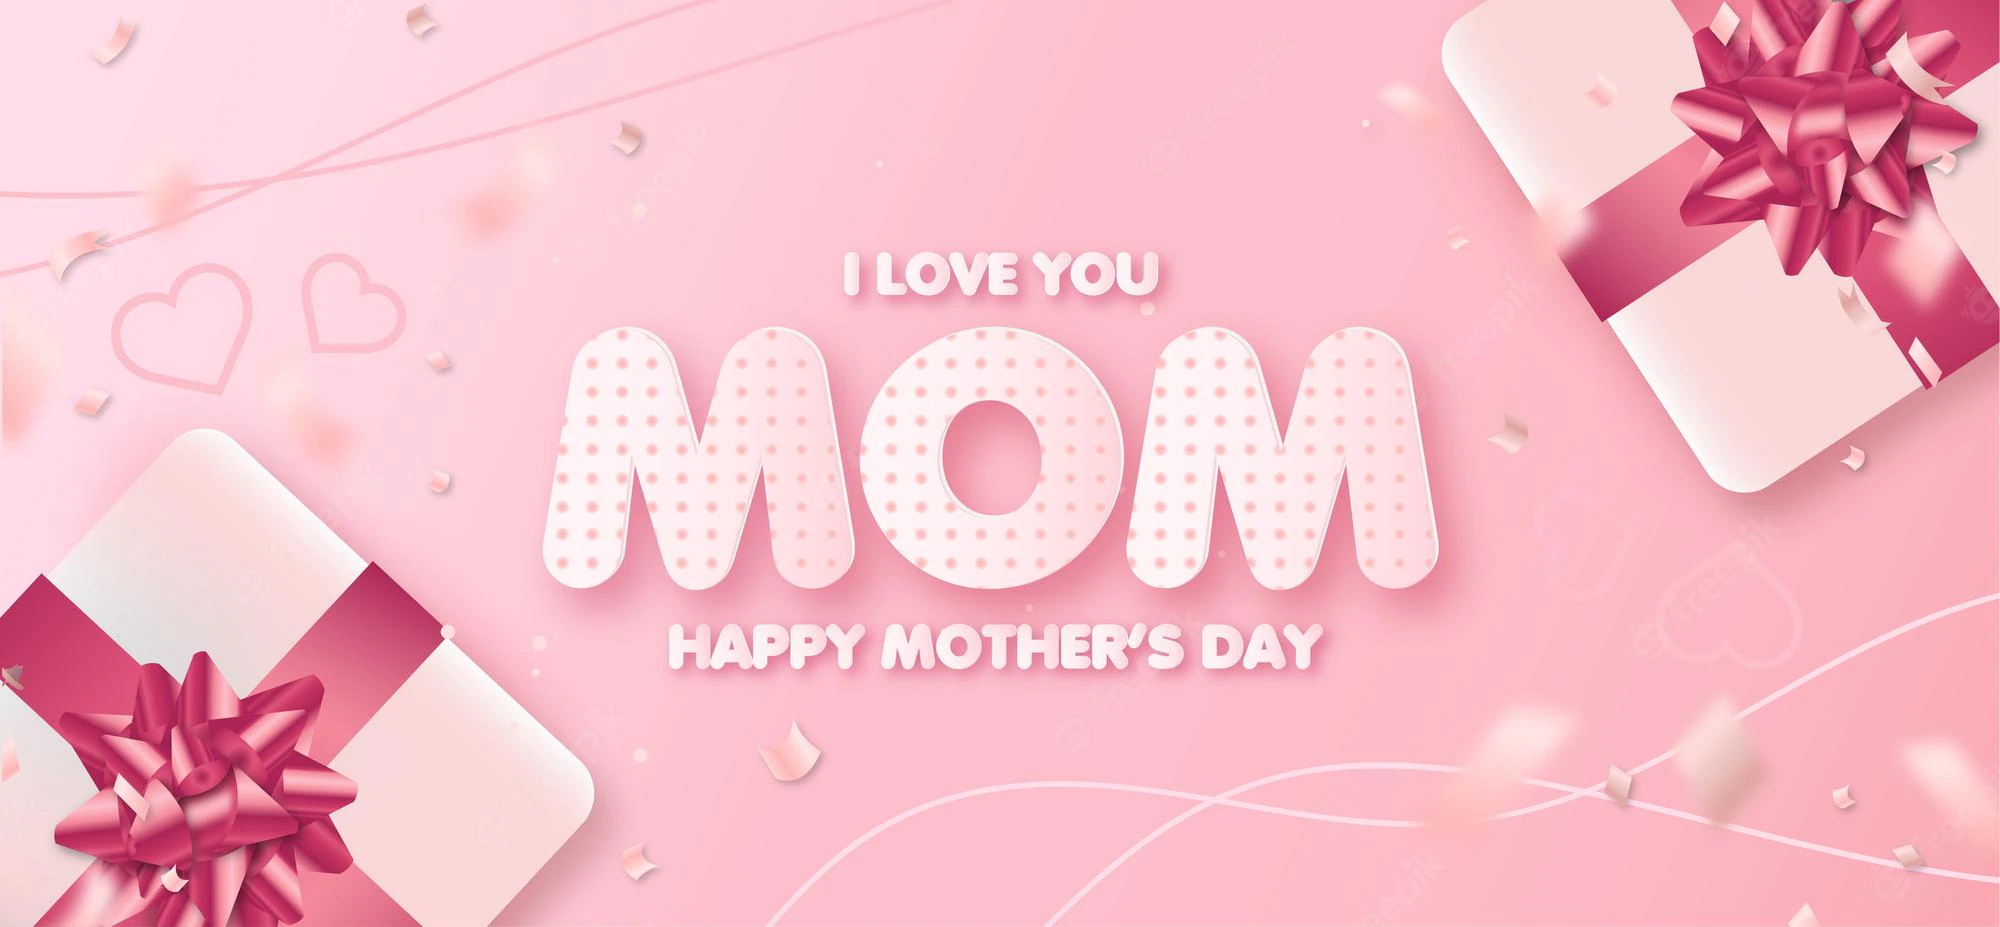 Happy Mothers Day Card With Realistic Gifts Background 1361 3340